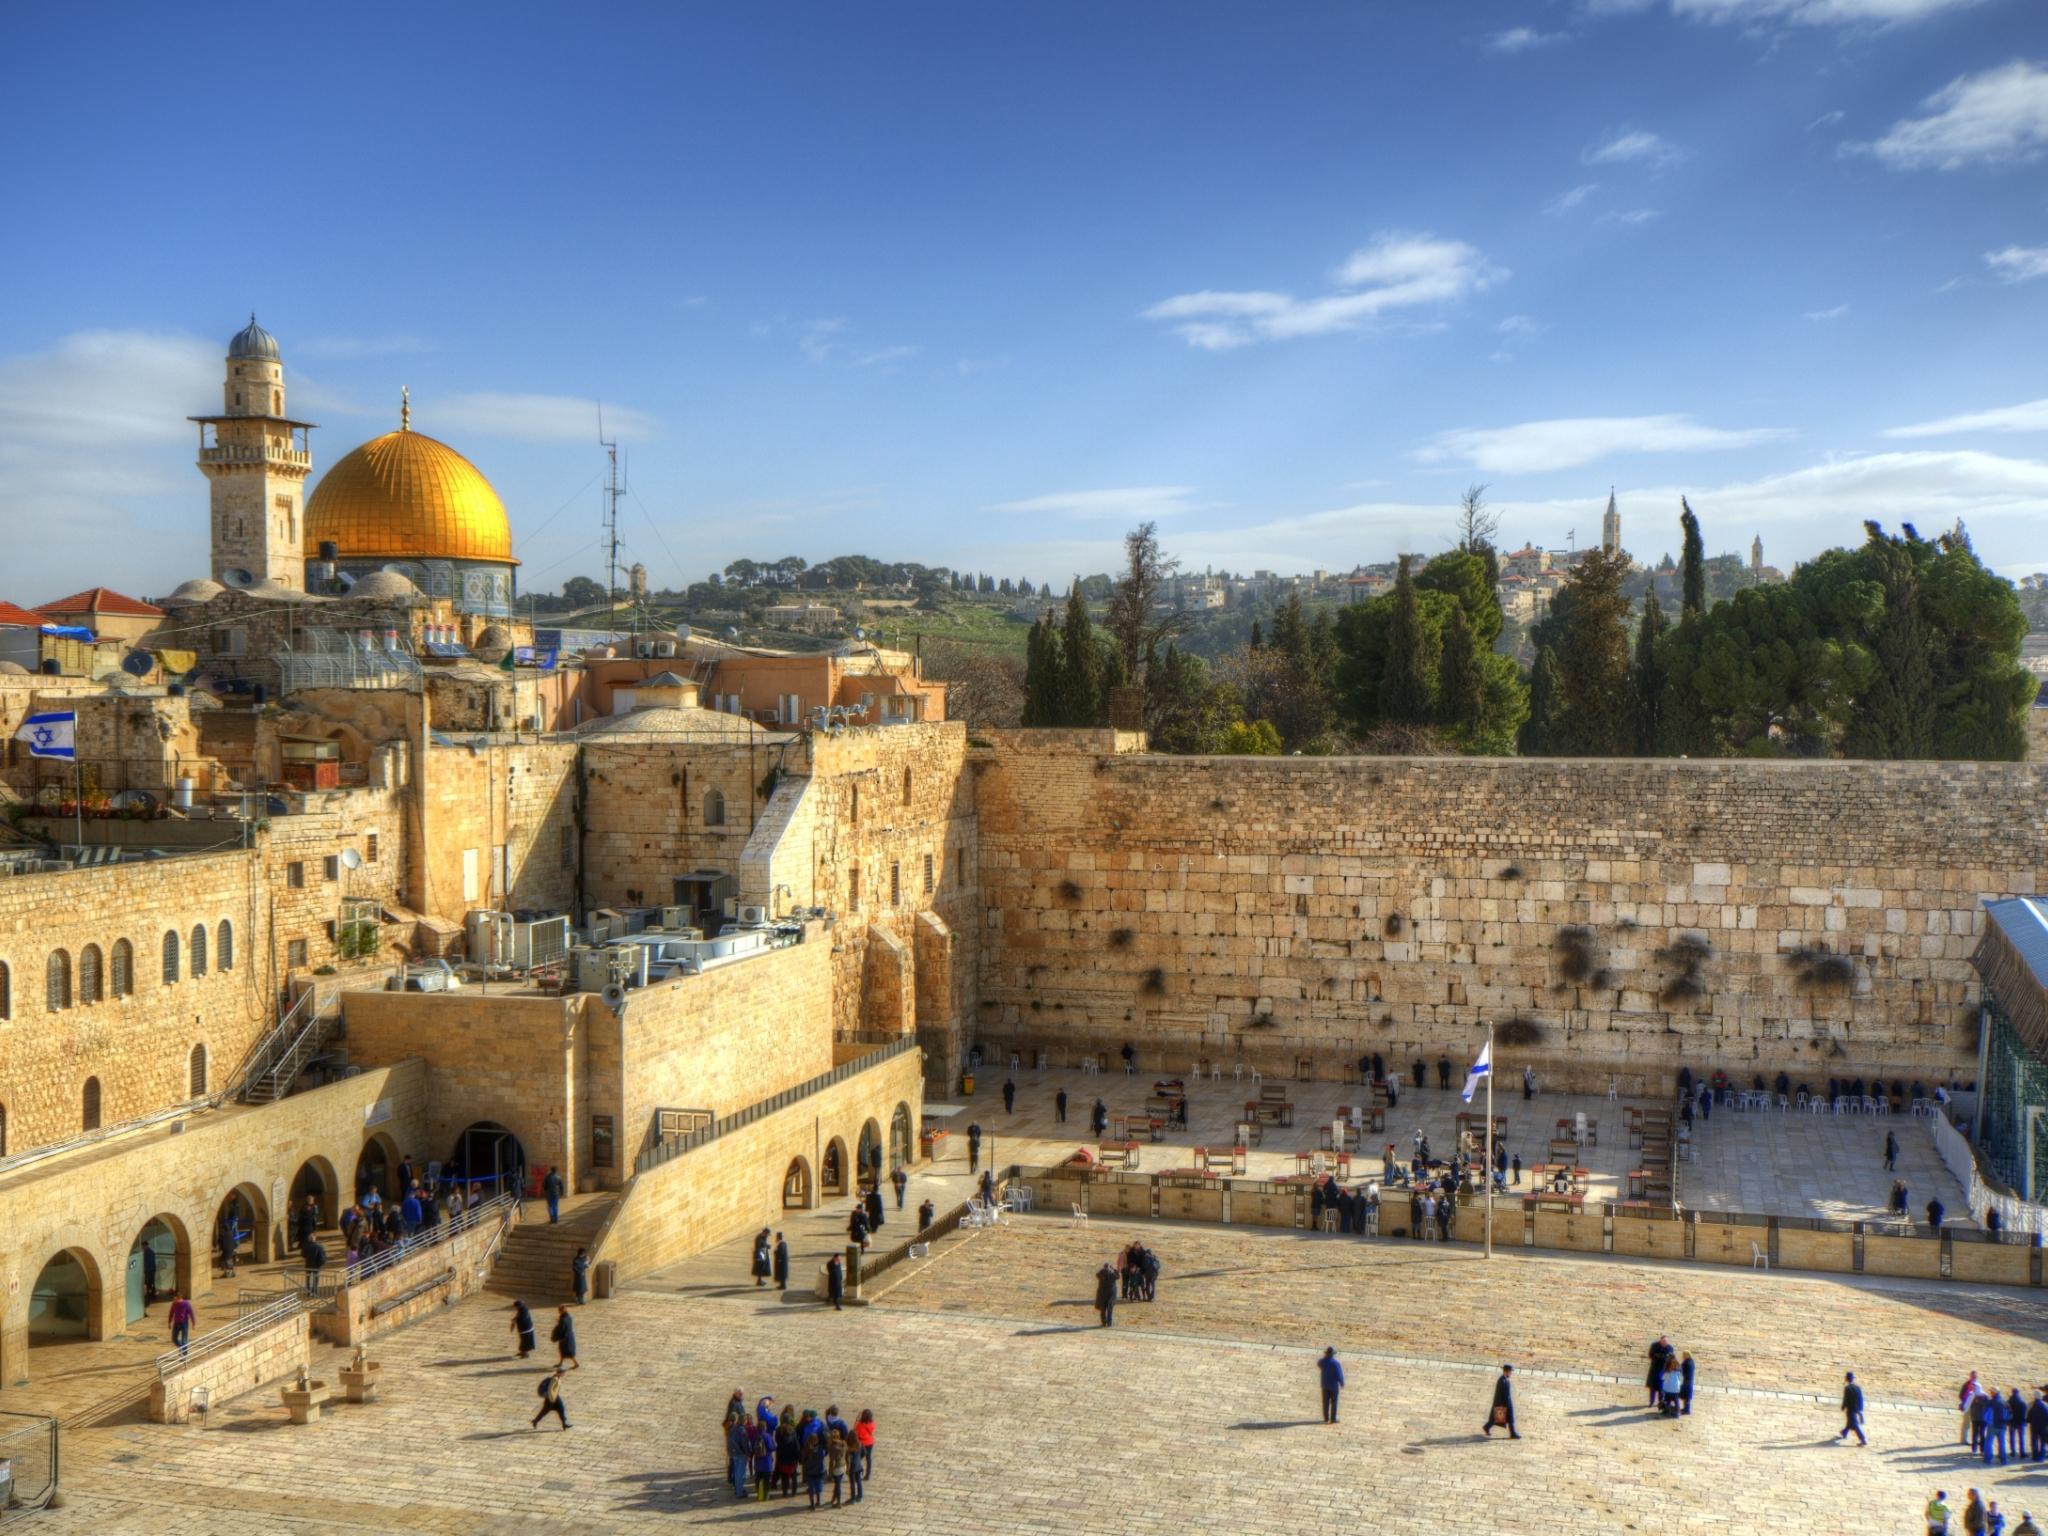 The Wailing Wall Kotel. Attractions in Jerusalem Old City